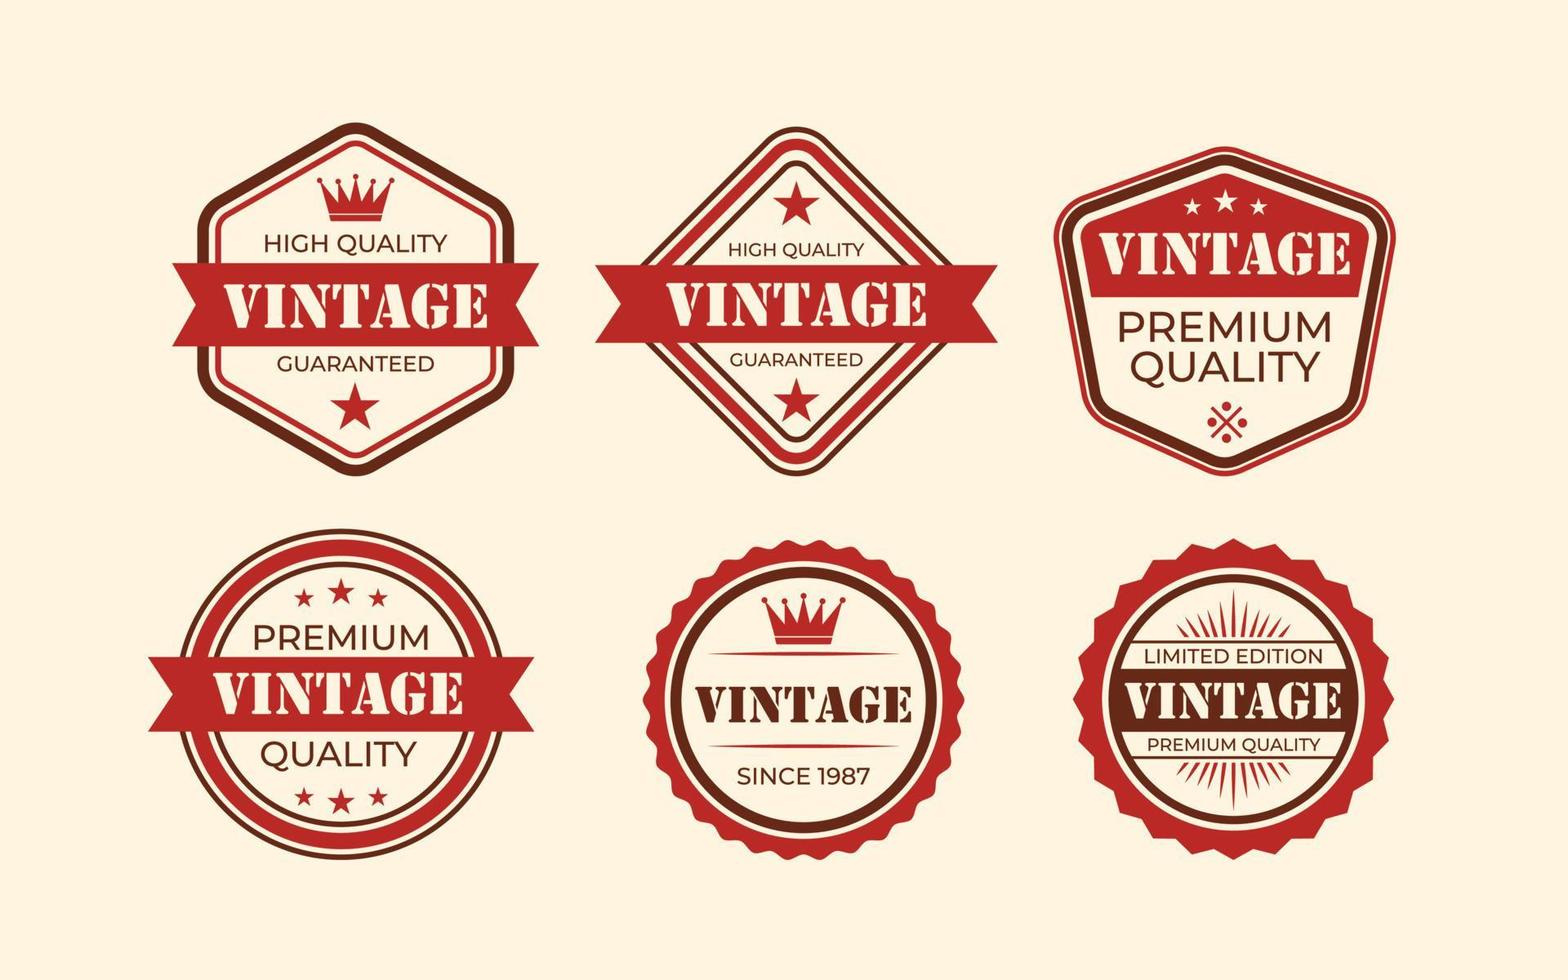 Set of vintage old retro logos with simple crown and stars, Cofe shop logos vector